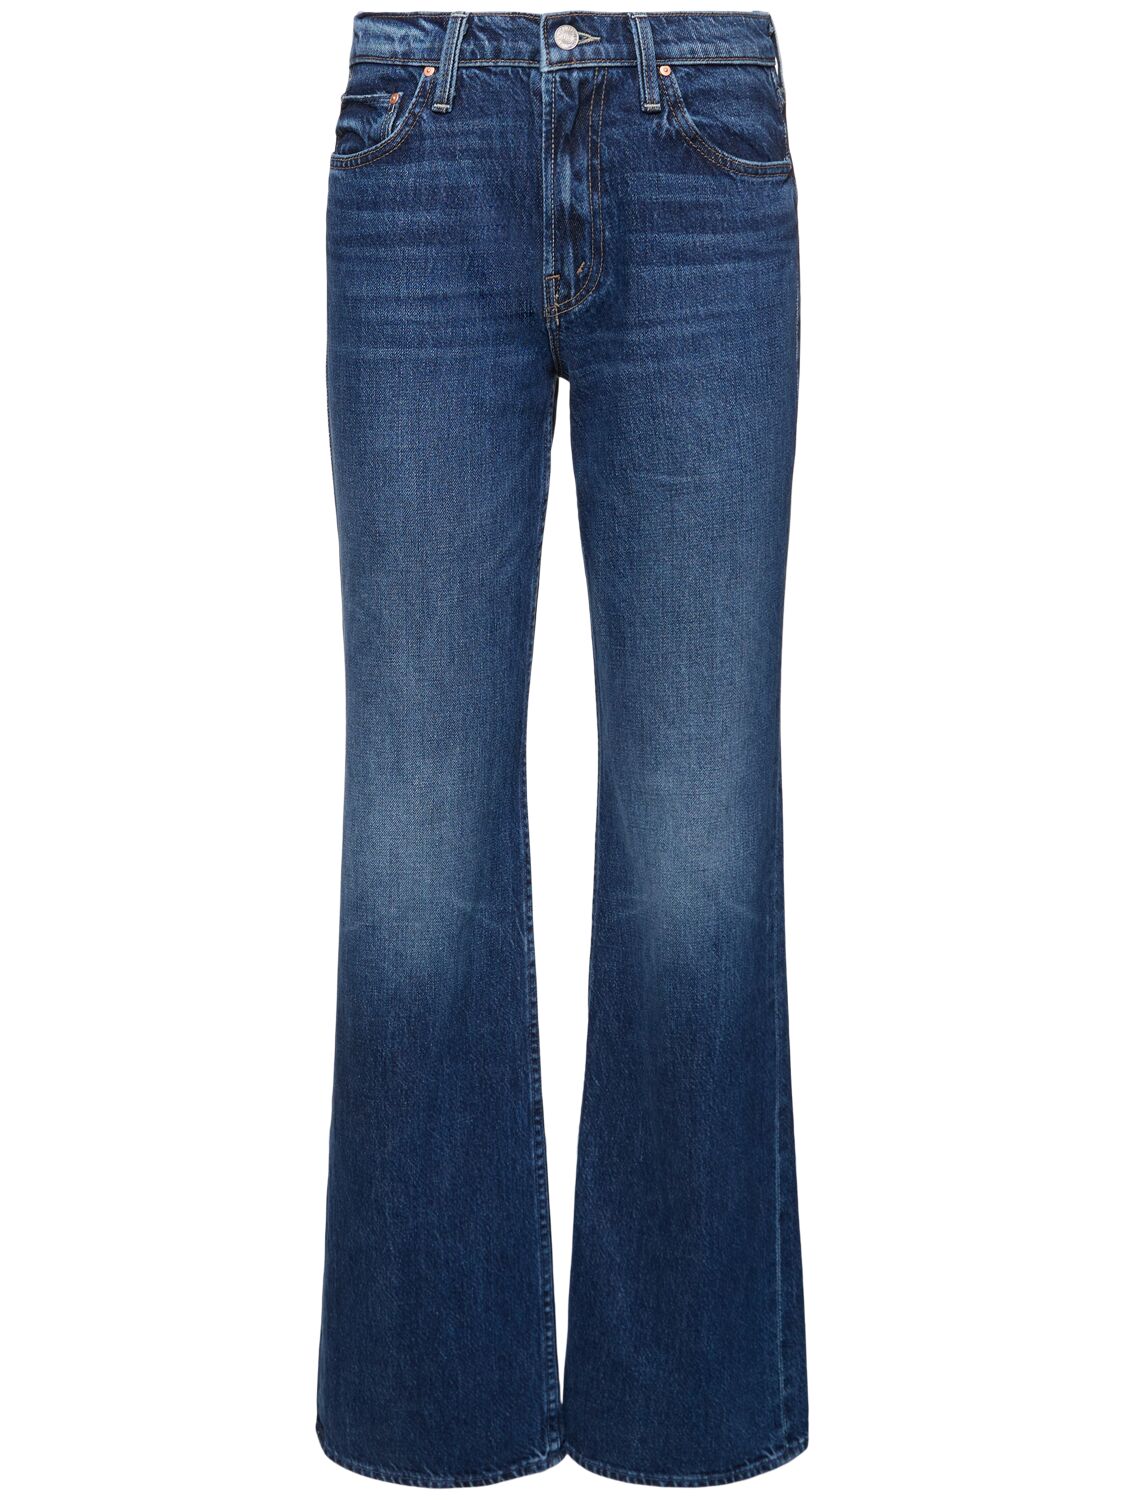 Image of The Bookie Heel High Rise Jeans